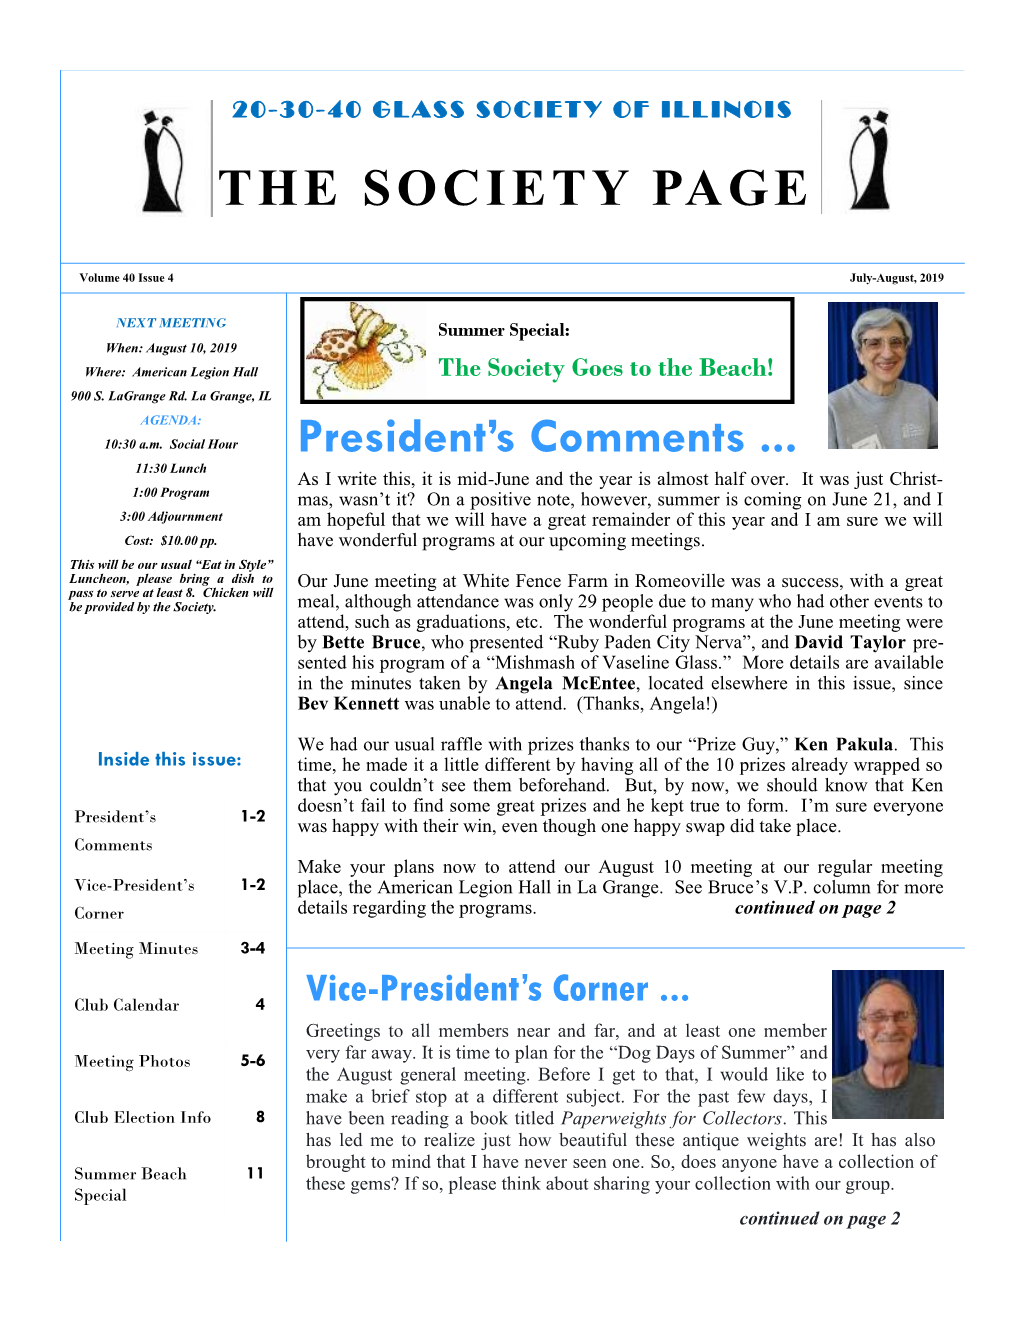 The Society Page